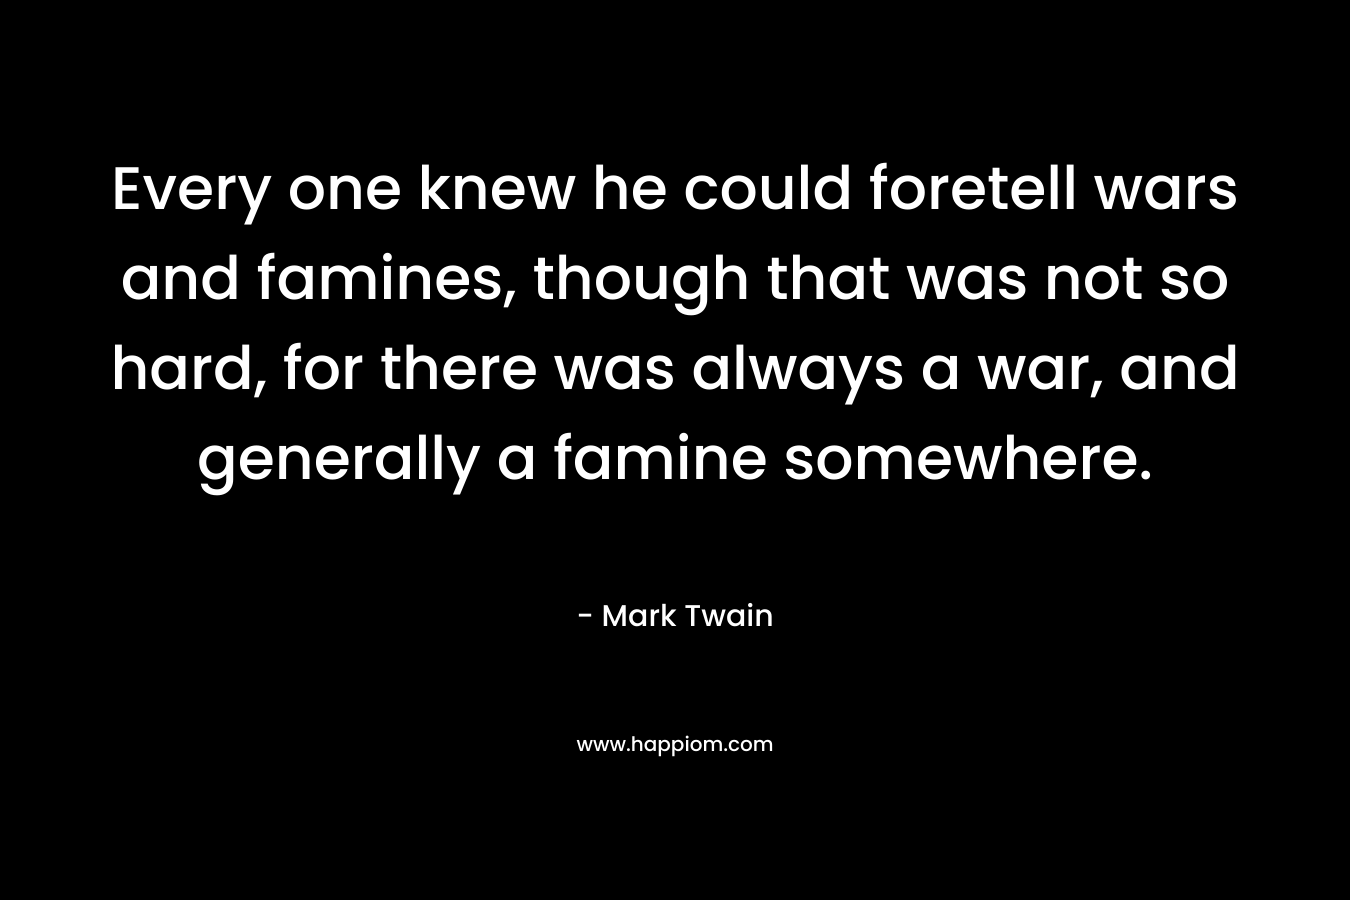 Every one knew he could foretell wars and famines, though that was not so hard, for there was always a war, and generally a famine somewhere. – Mark Twain